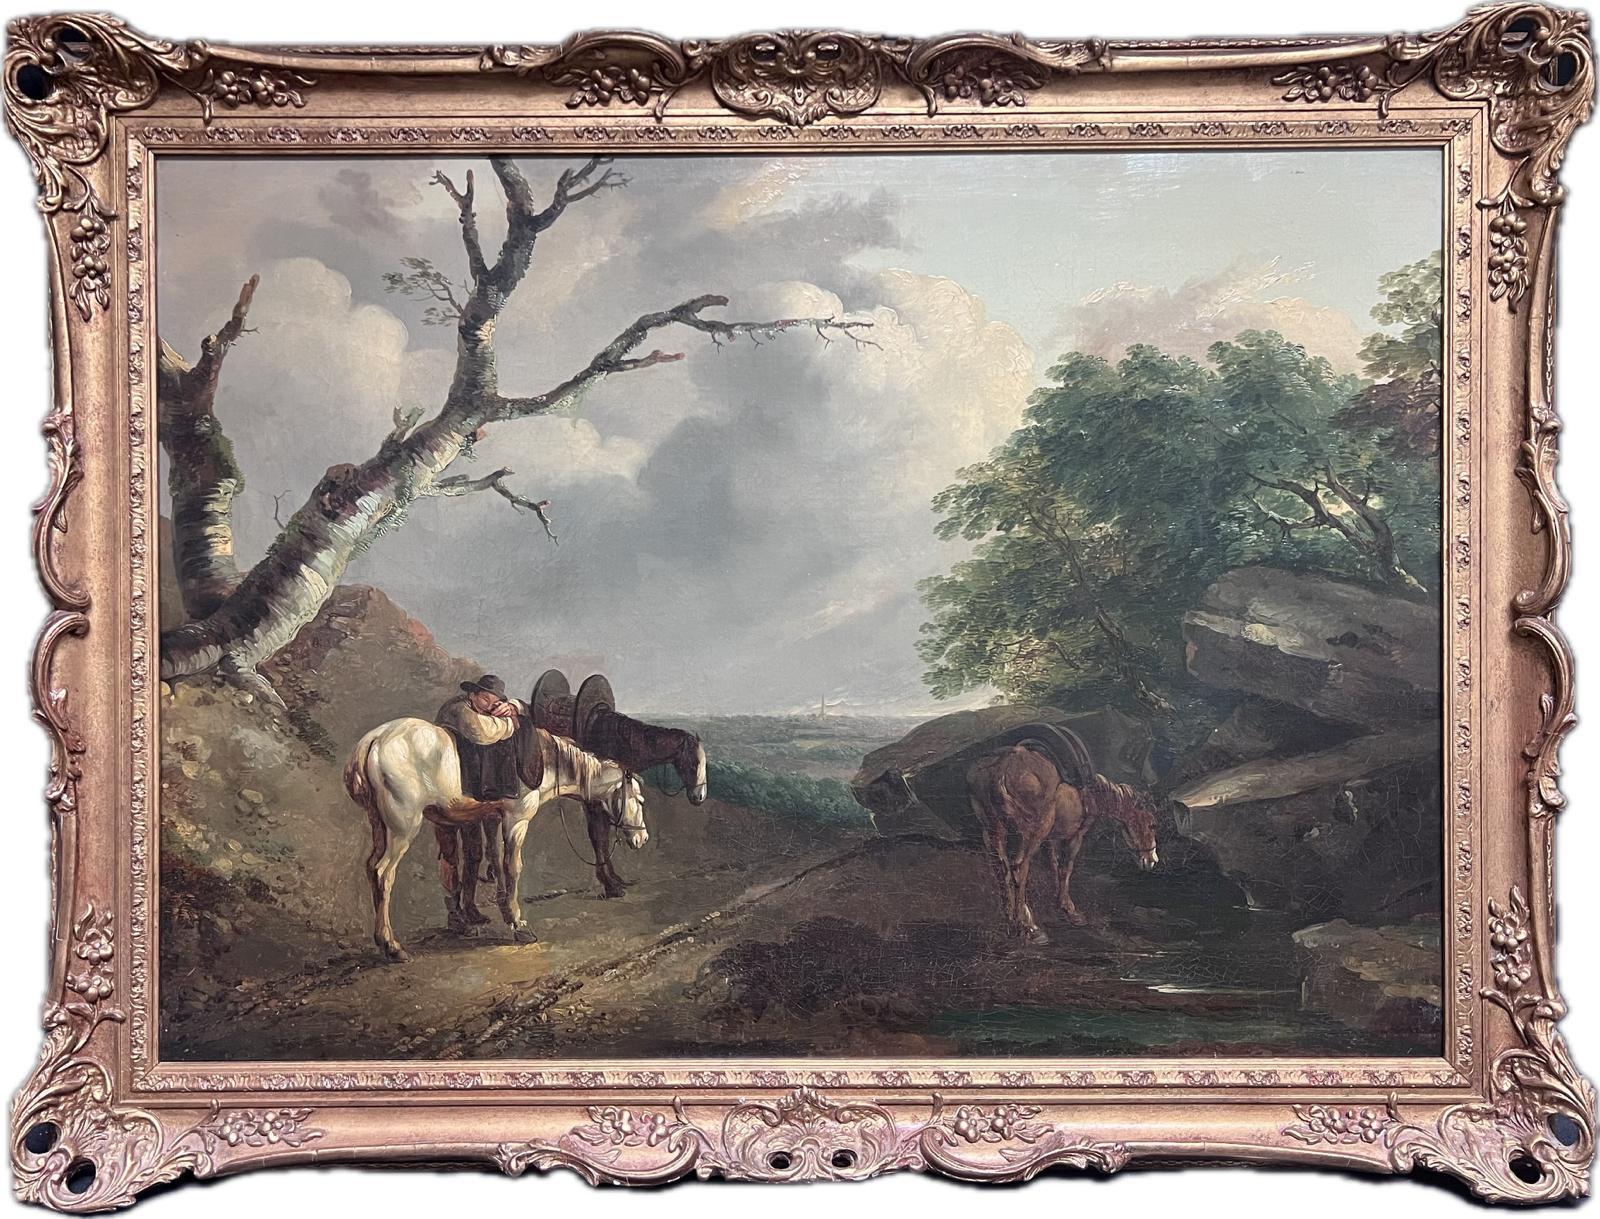 Thomas Barker of Bath Landscape Painting - Huge 1800's English Oil Painting Man with Horses Resting Panoramic Country View